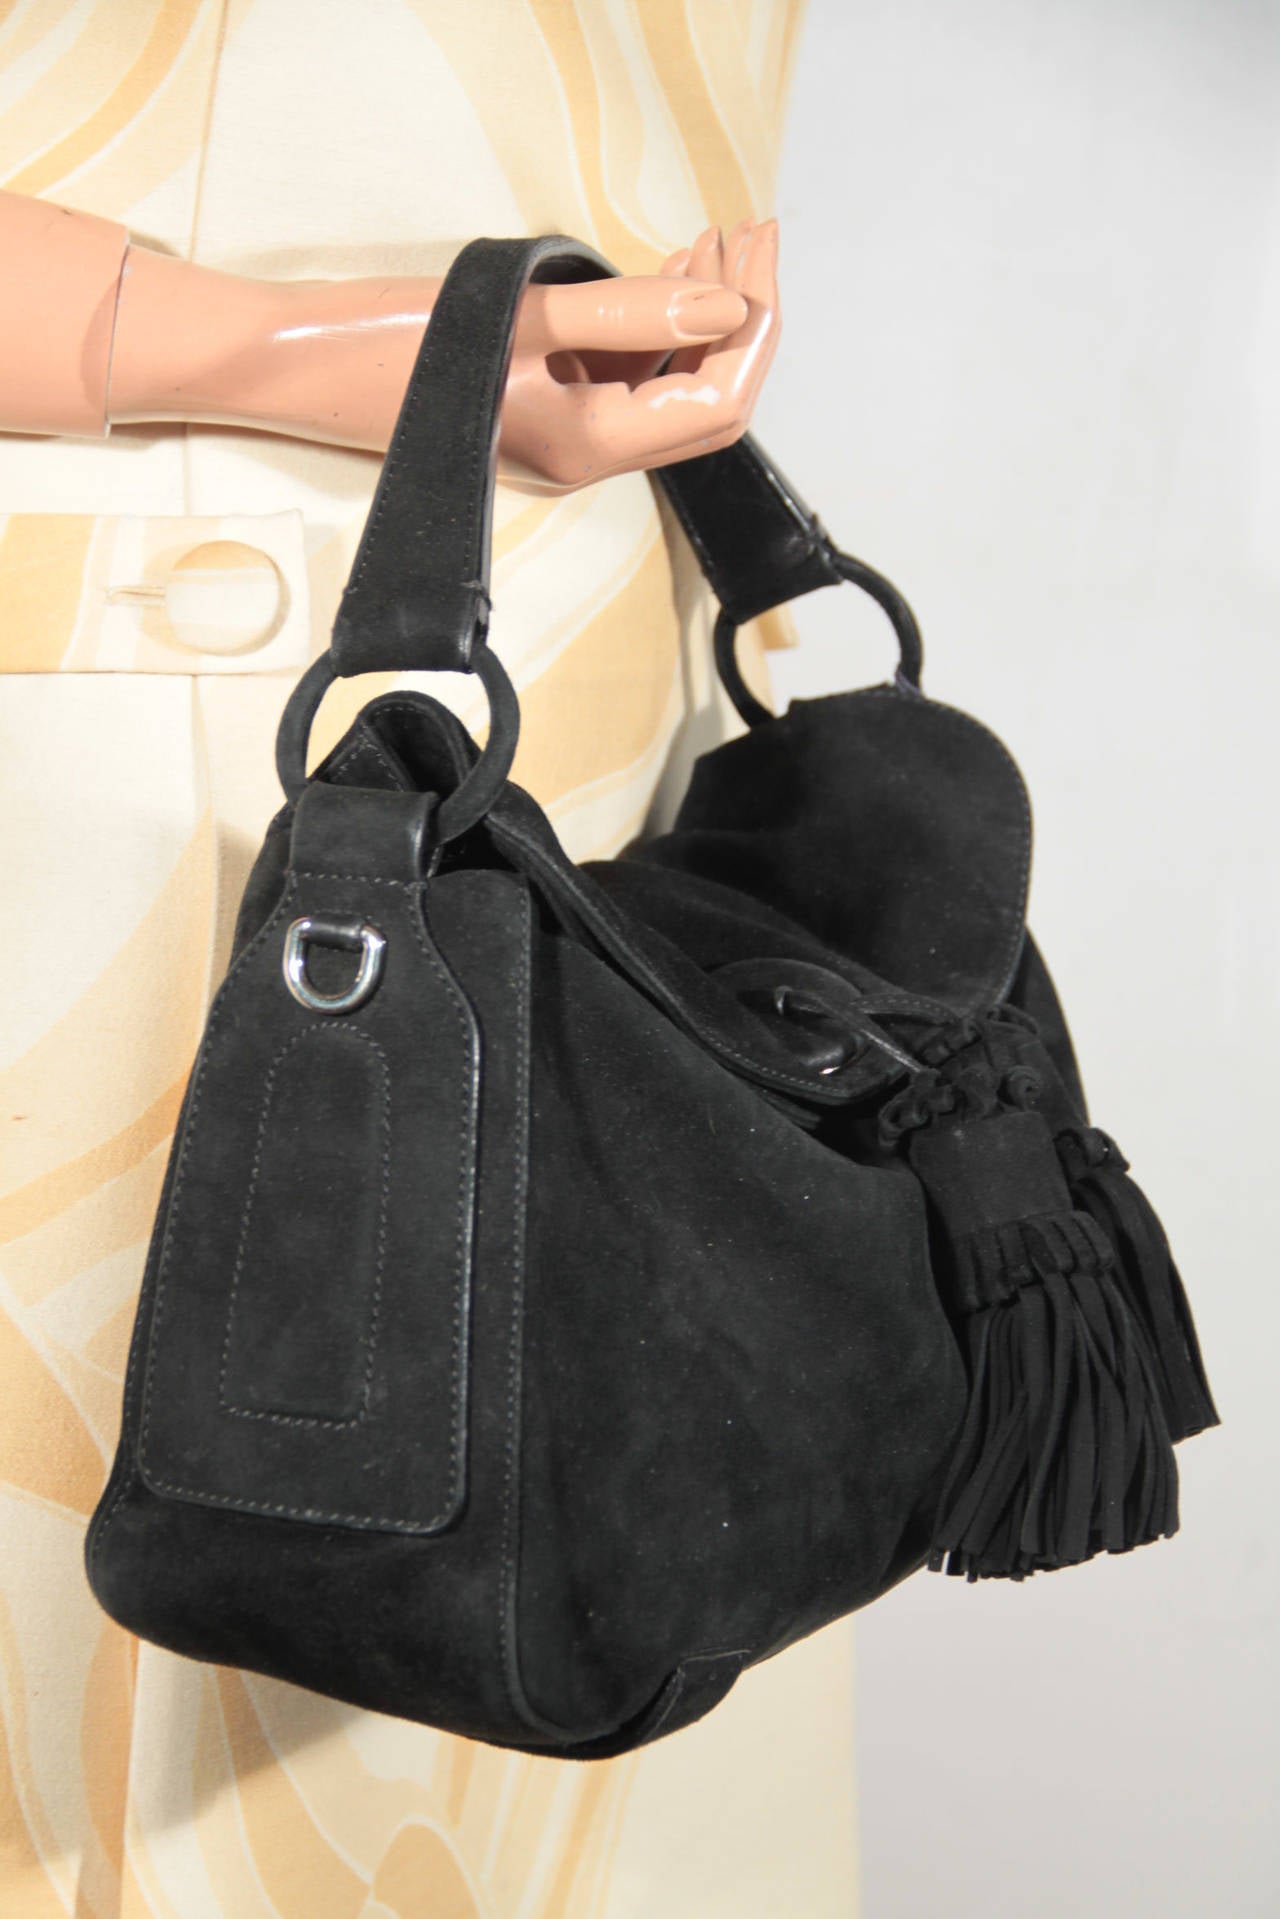 YVES SAINT LAURENT Black Suede SHOULDER BAG Tote HOBO w/ TASSELS In Excellent Condition In Rome, Rome